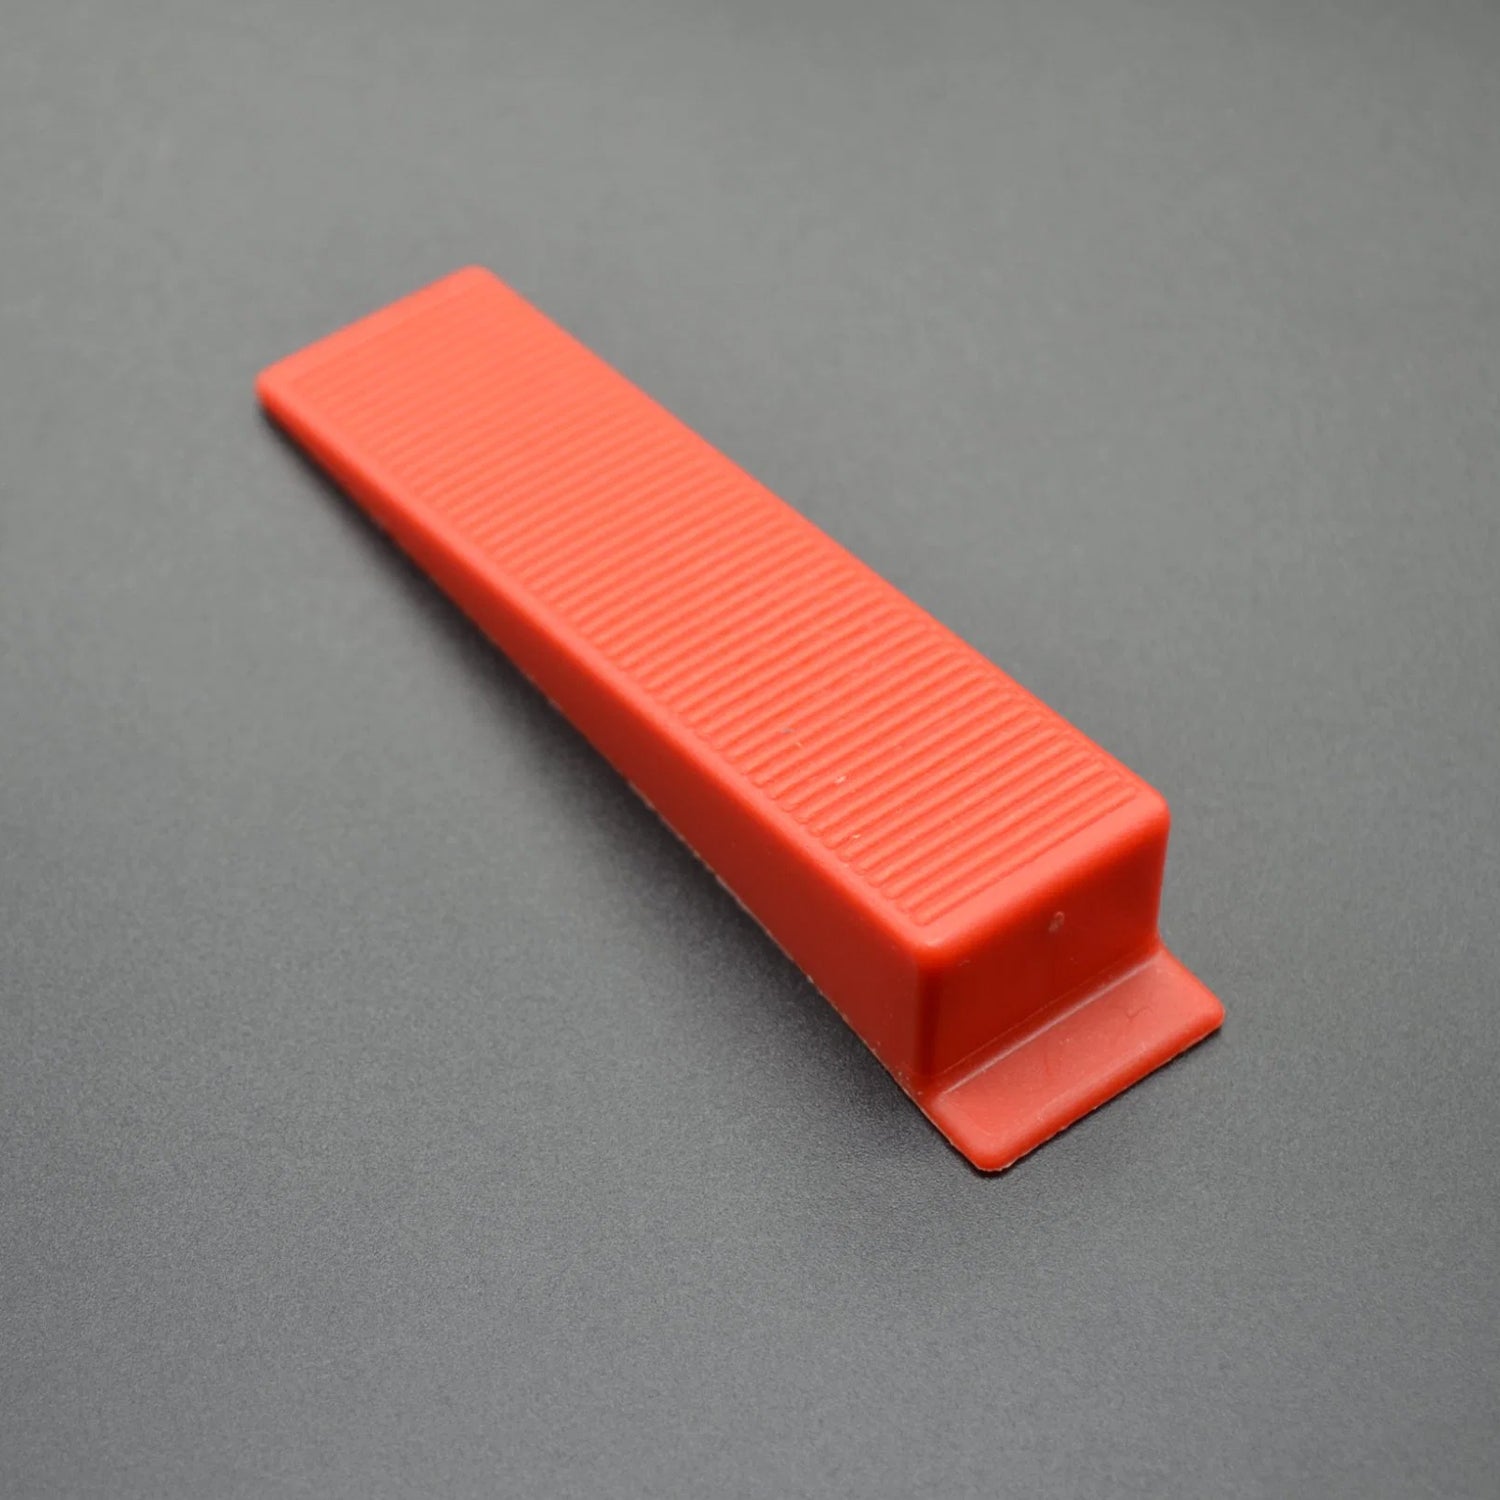  Tile Leveling Wedges Spacer Plus Reusable